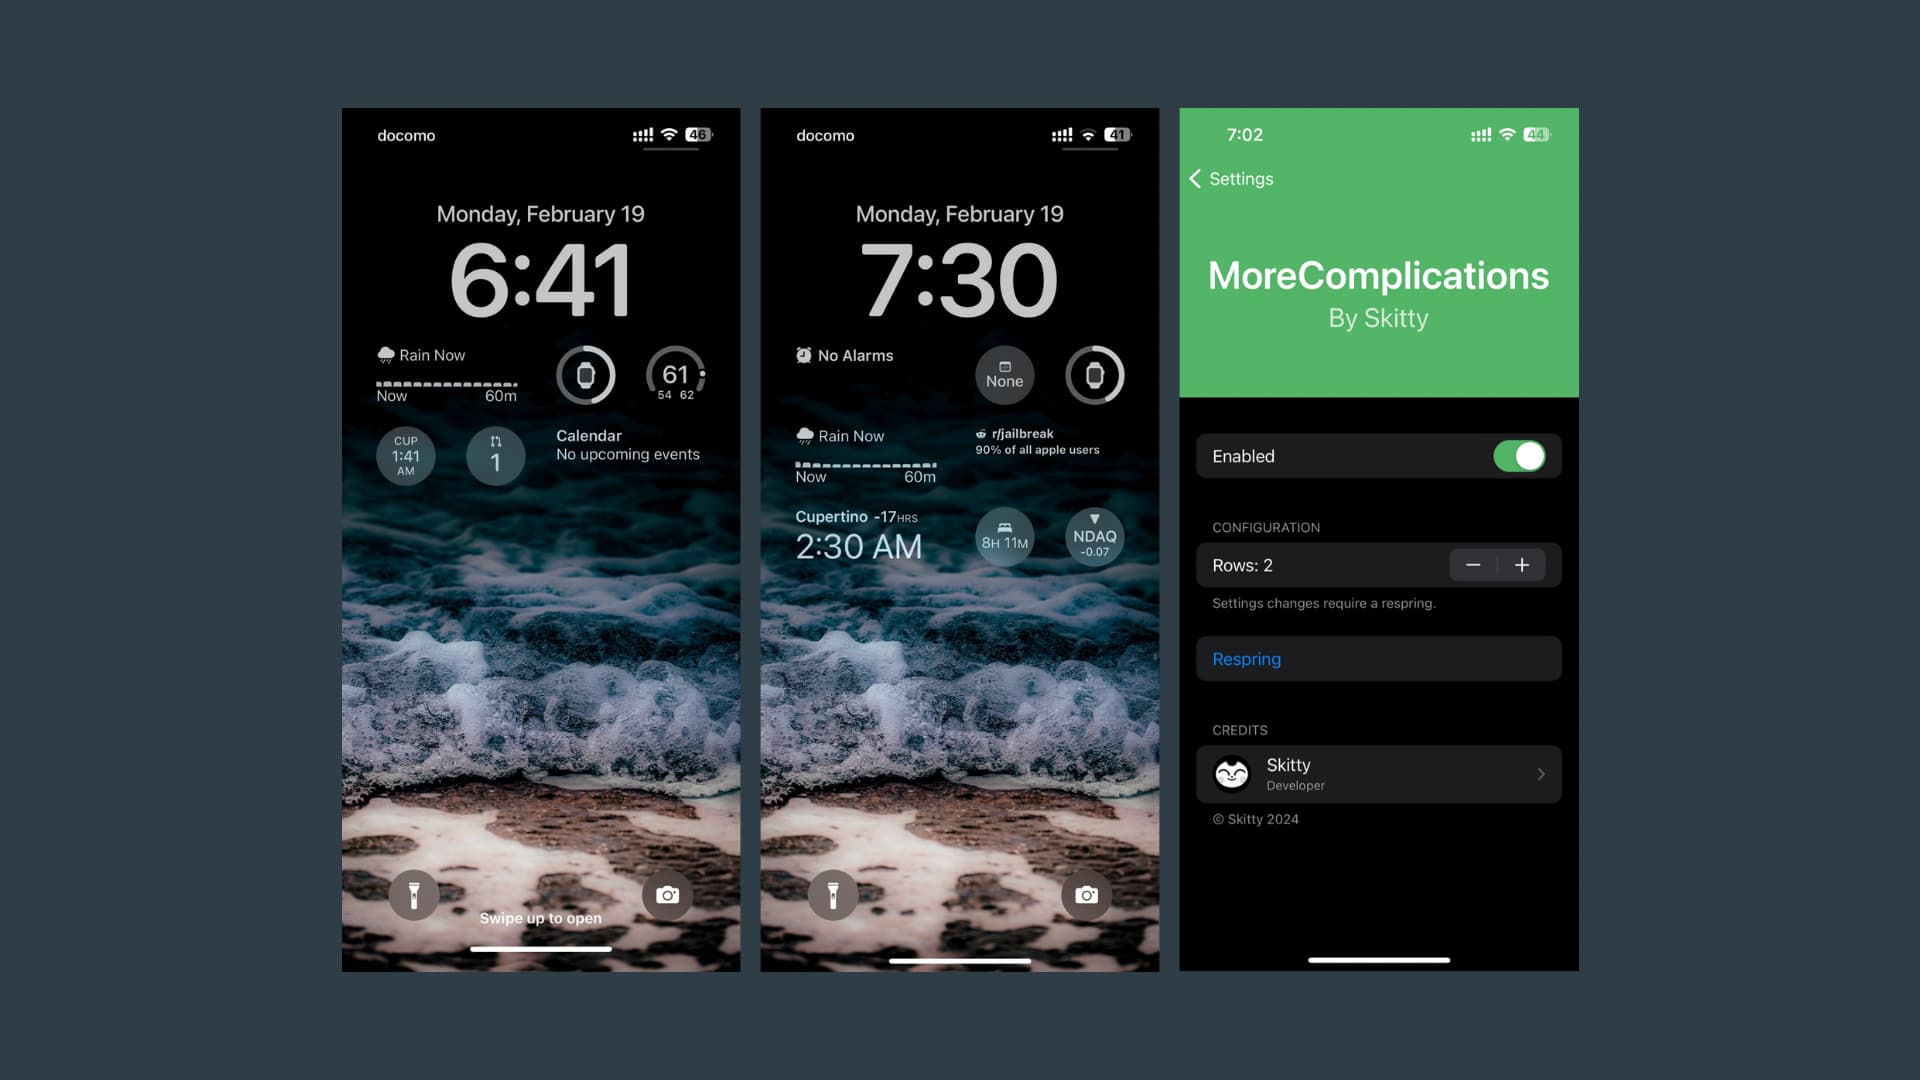 MoreComplicatioks adds more widget rows to the iOS 16 Lock Screen.